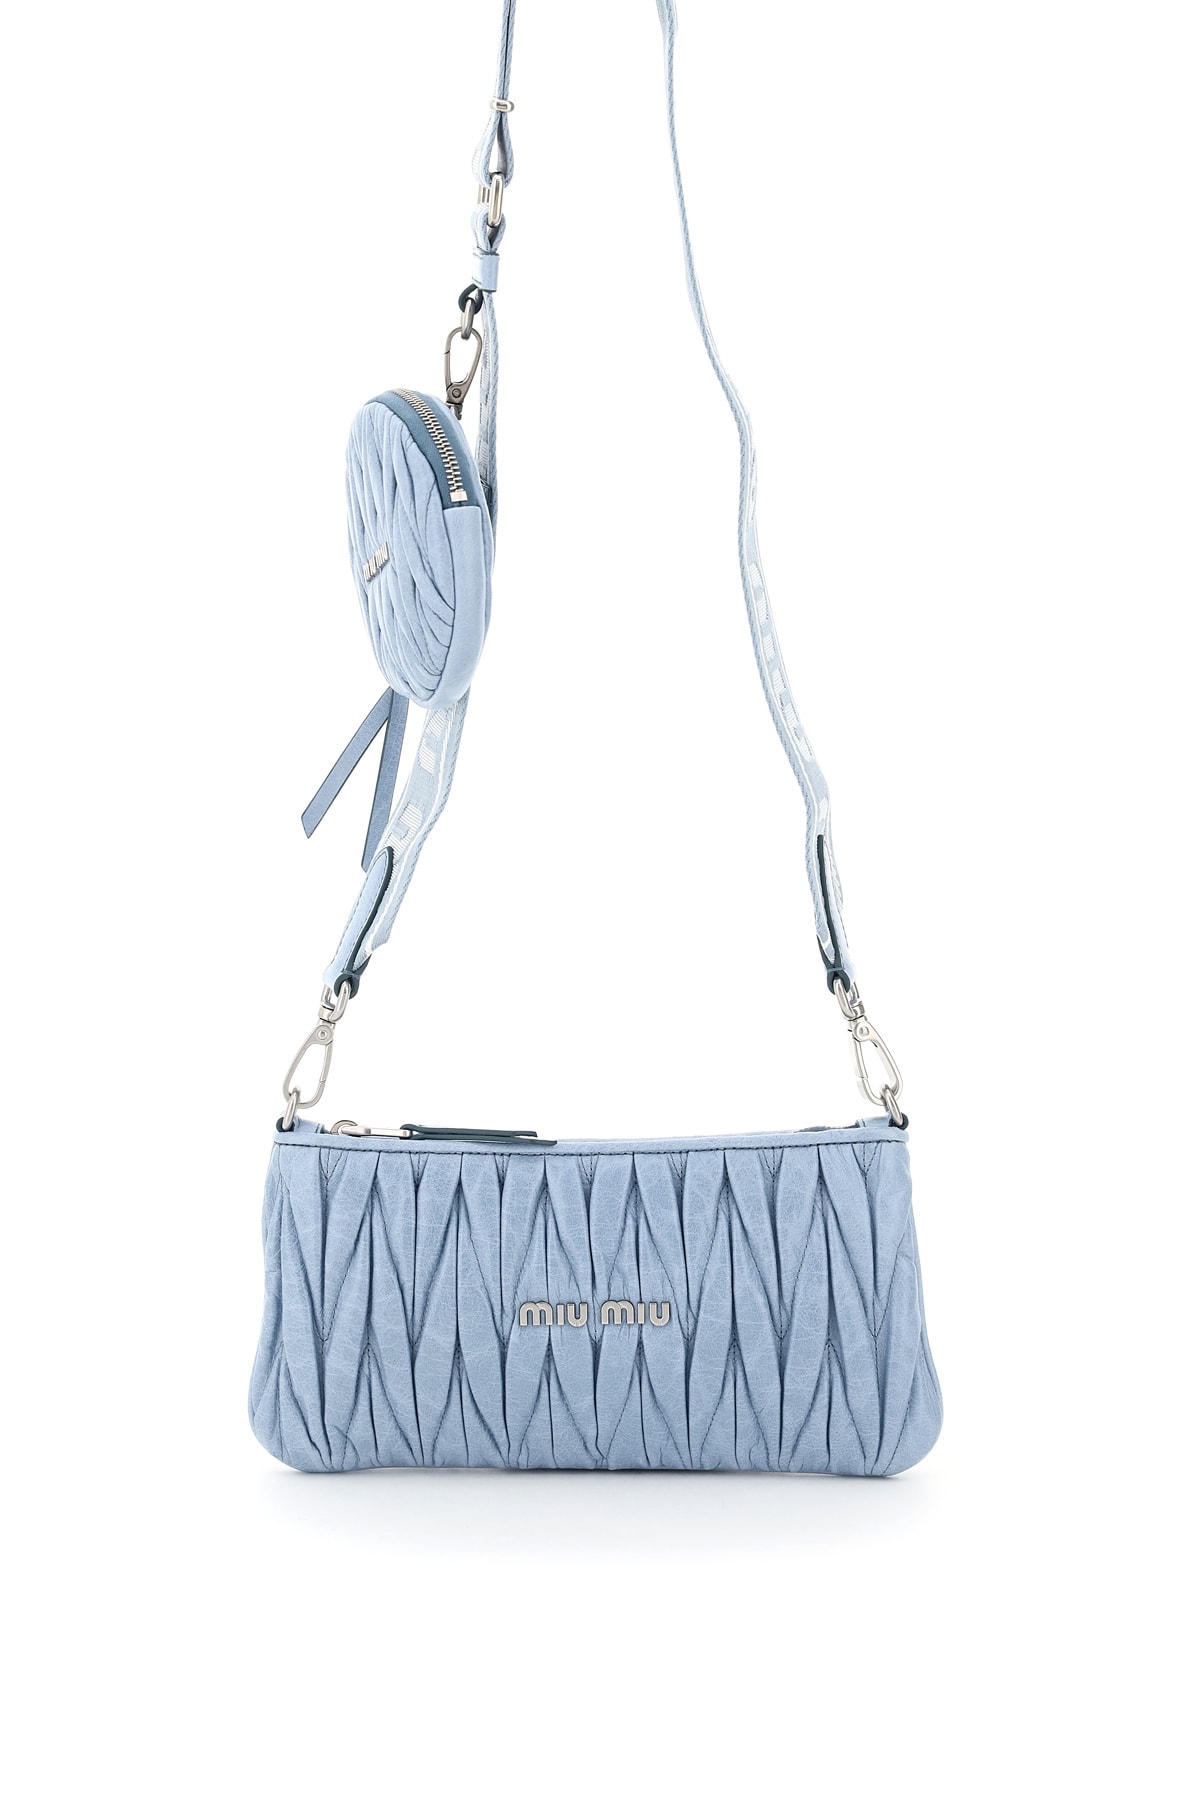 MIU MIU QUILTED MINI BAG WITH POUCH,11902520